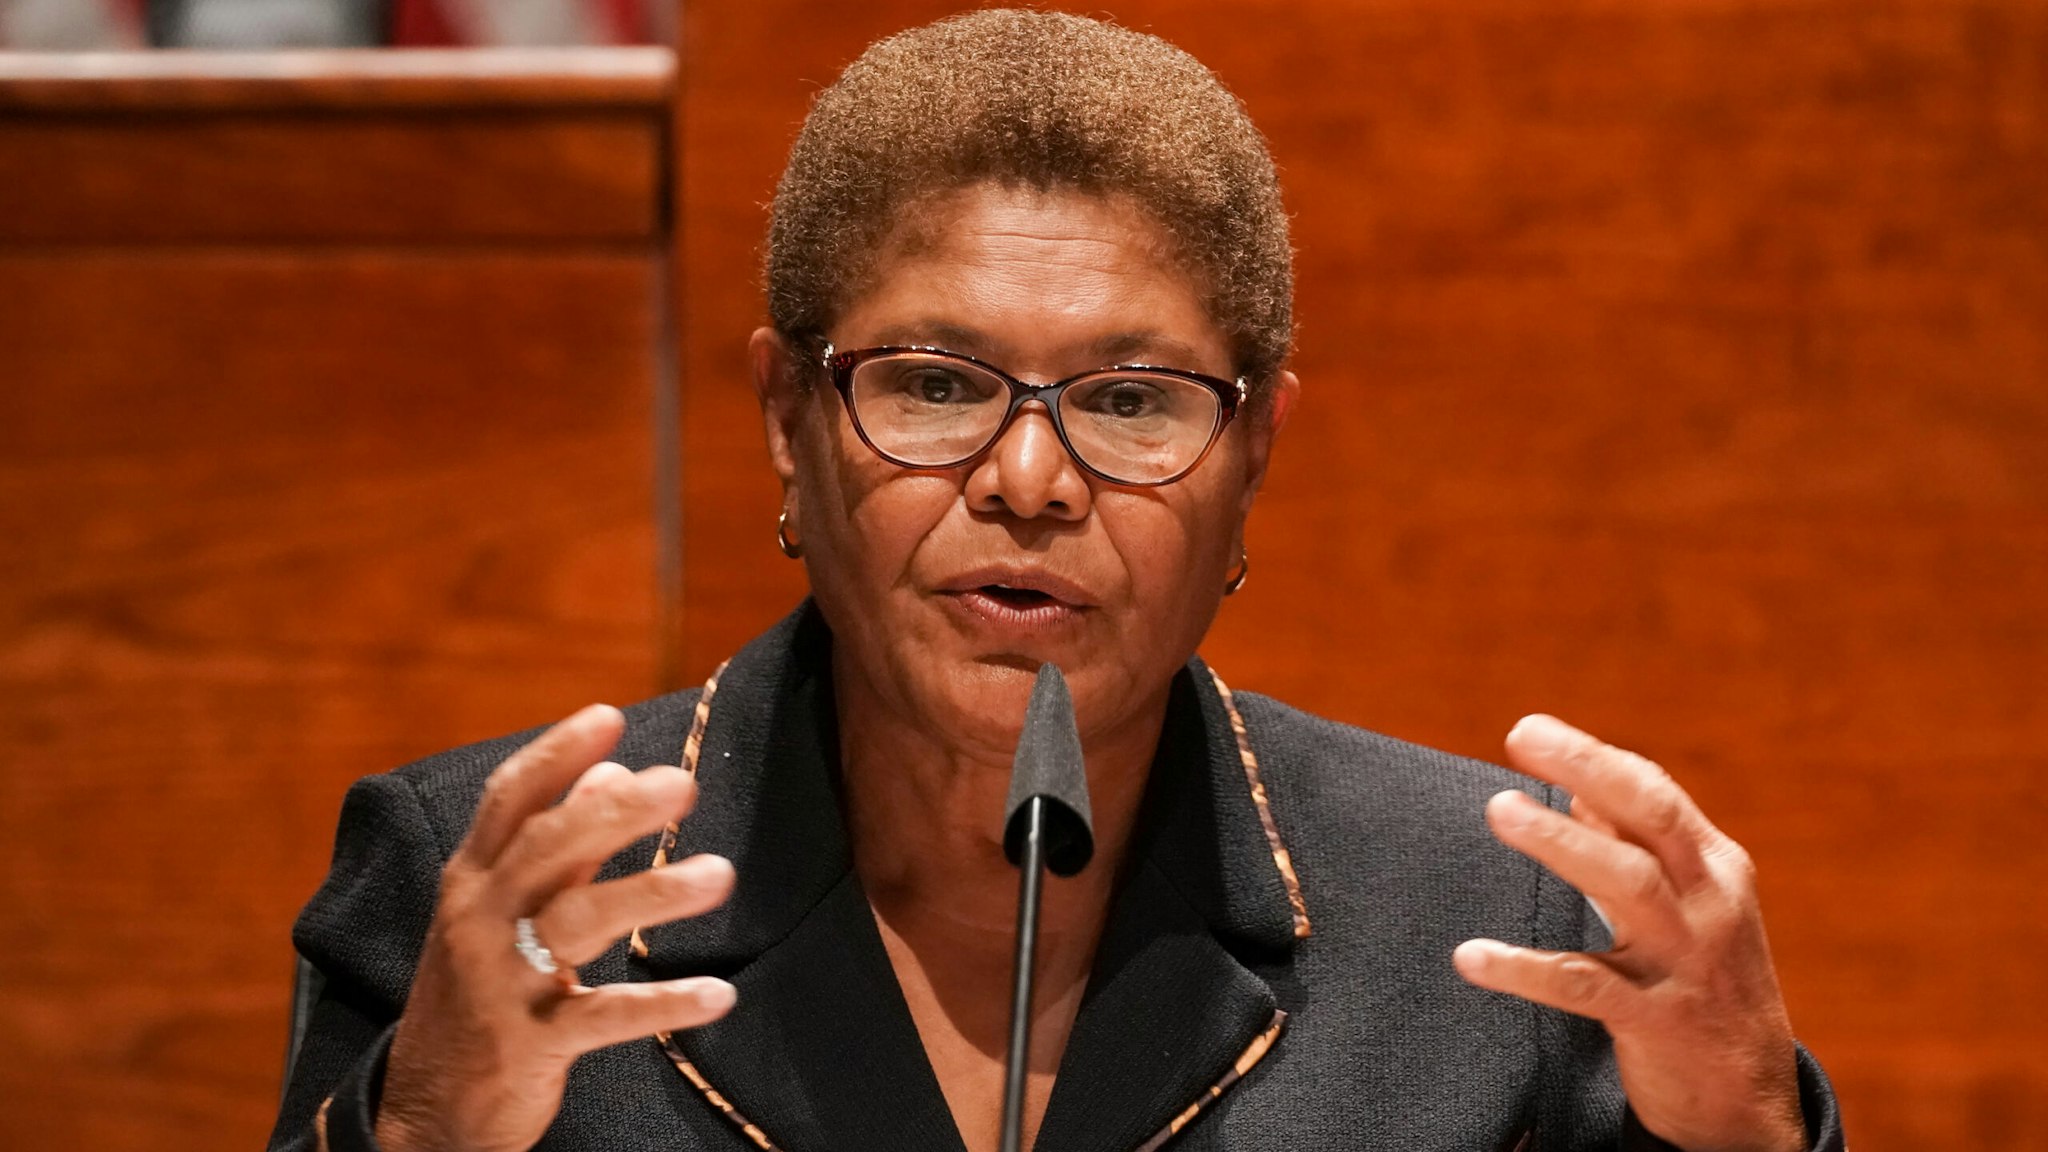 Representative Karen Bass, a Democrat from California, speaks during a House Judiciary Committee markup on H.R. 7120, the "Justice in Policing Act of 2020," in Washington, D.C., U.S., on Wednesday, June 17, 2020. The House bill would make it easier to prosecute and sue officers and would ban federal officers from using choke holds, bar racial profiling, end "no-knock" search warrants in drug cases, create a national registry for police violations, and require local police departments that get federal funds to conduct bias training.